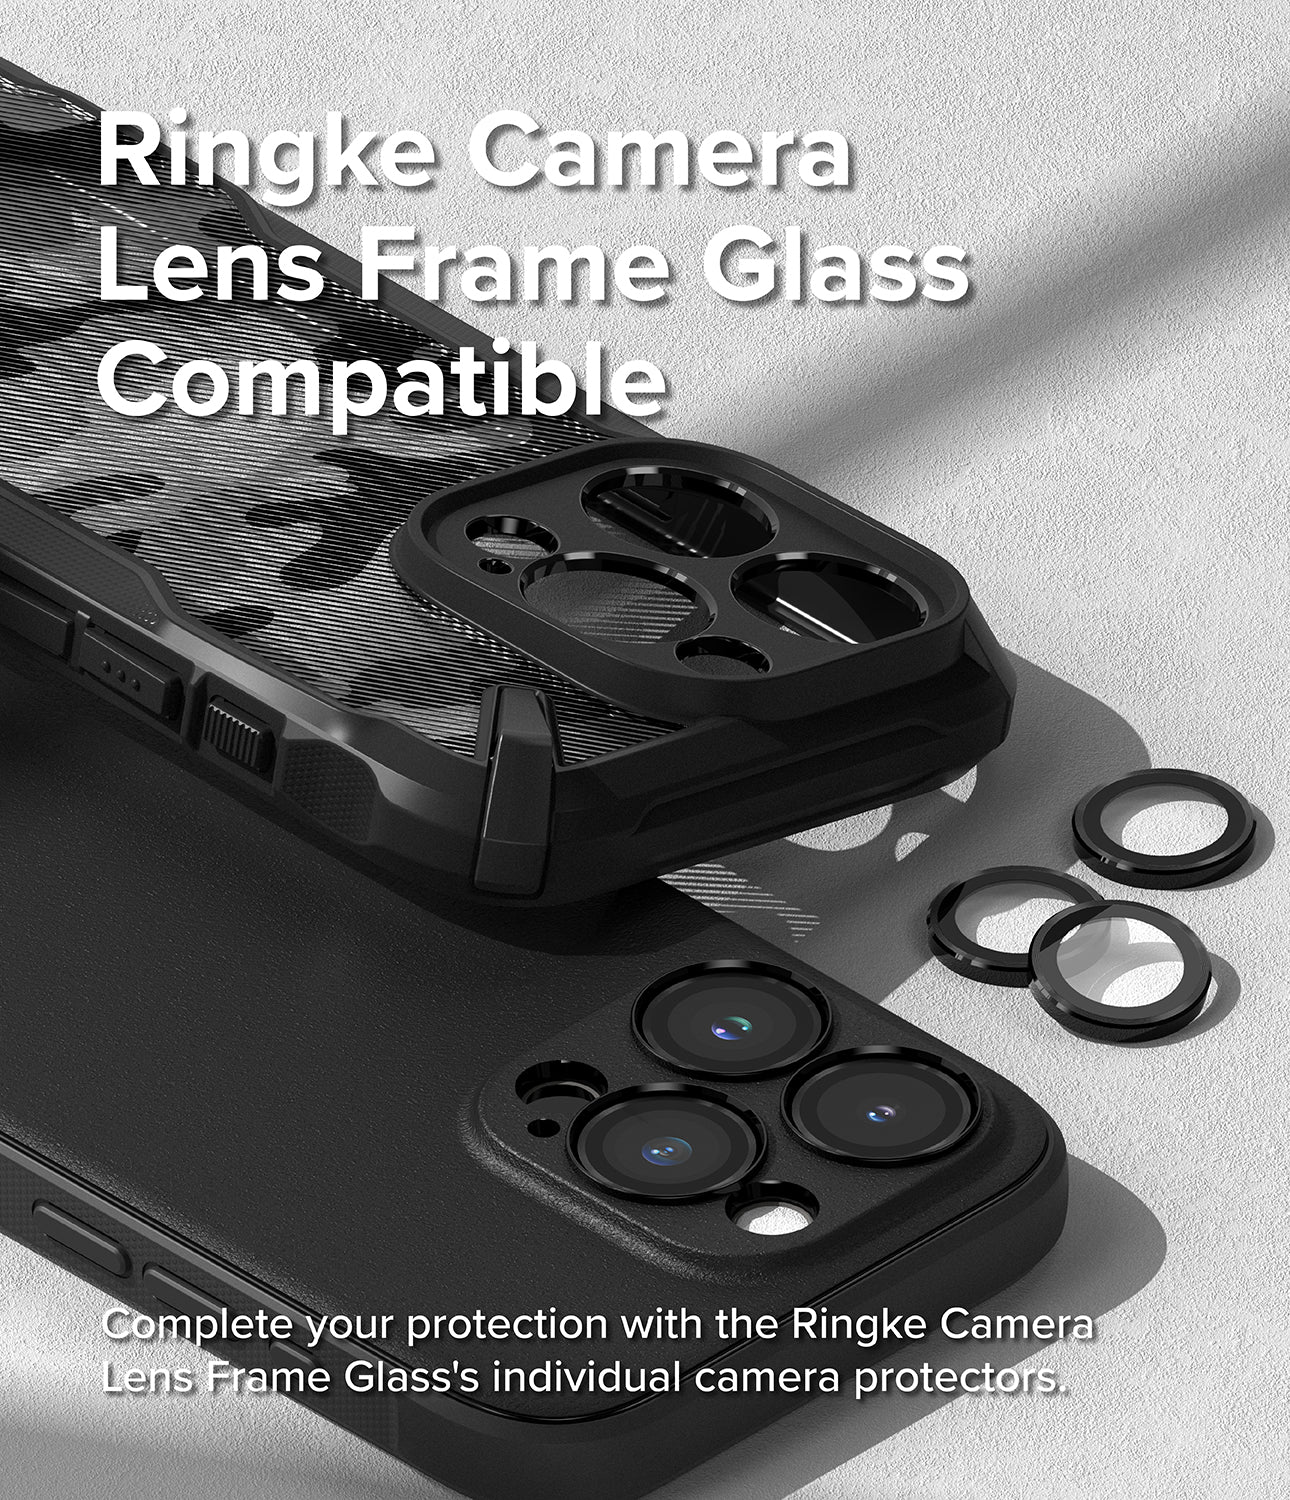 iPhone 15 Pro Case | Onyx - Black - Ringke Camera Lens Frame Glass Compatible. Complete your protection with the Ringke Camera Lens Frame Glass' individual camera protectors.